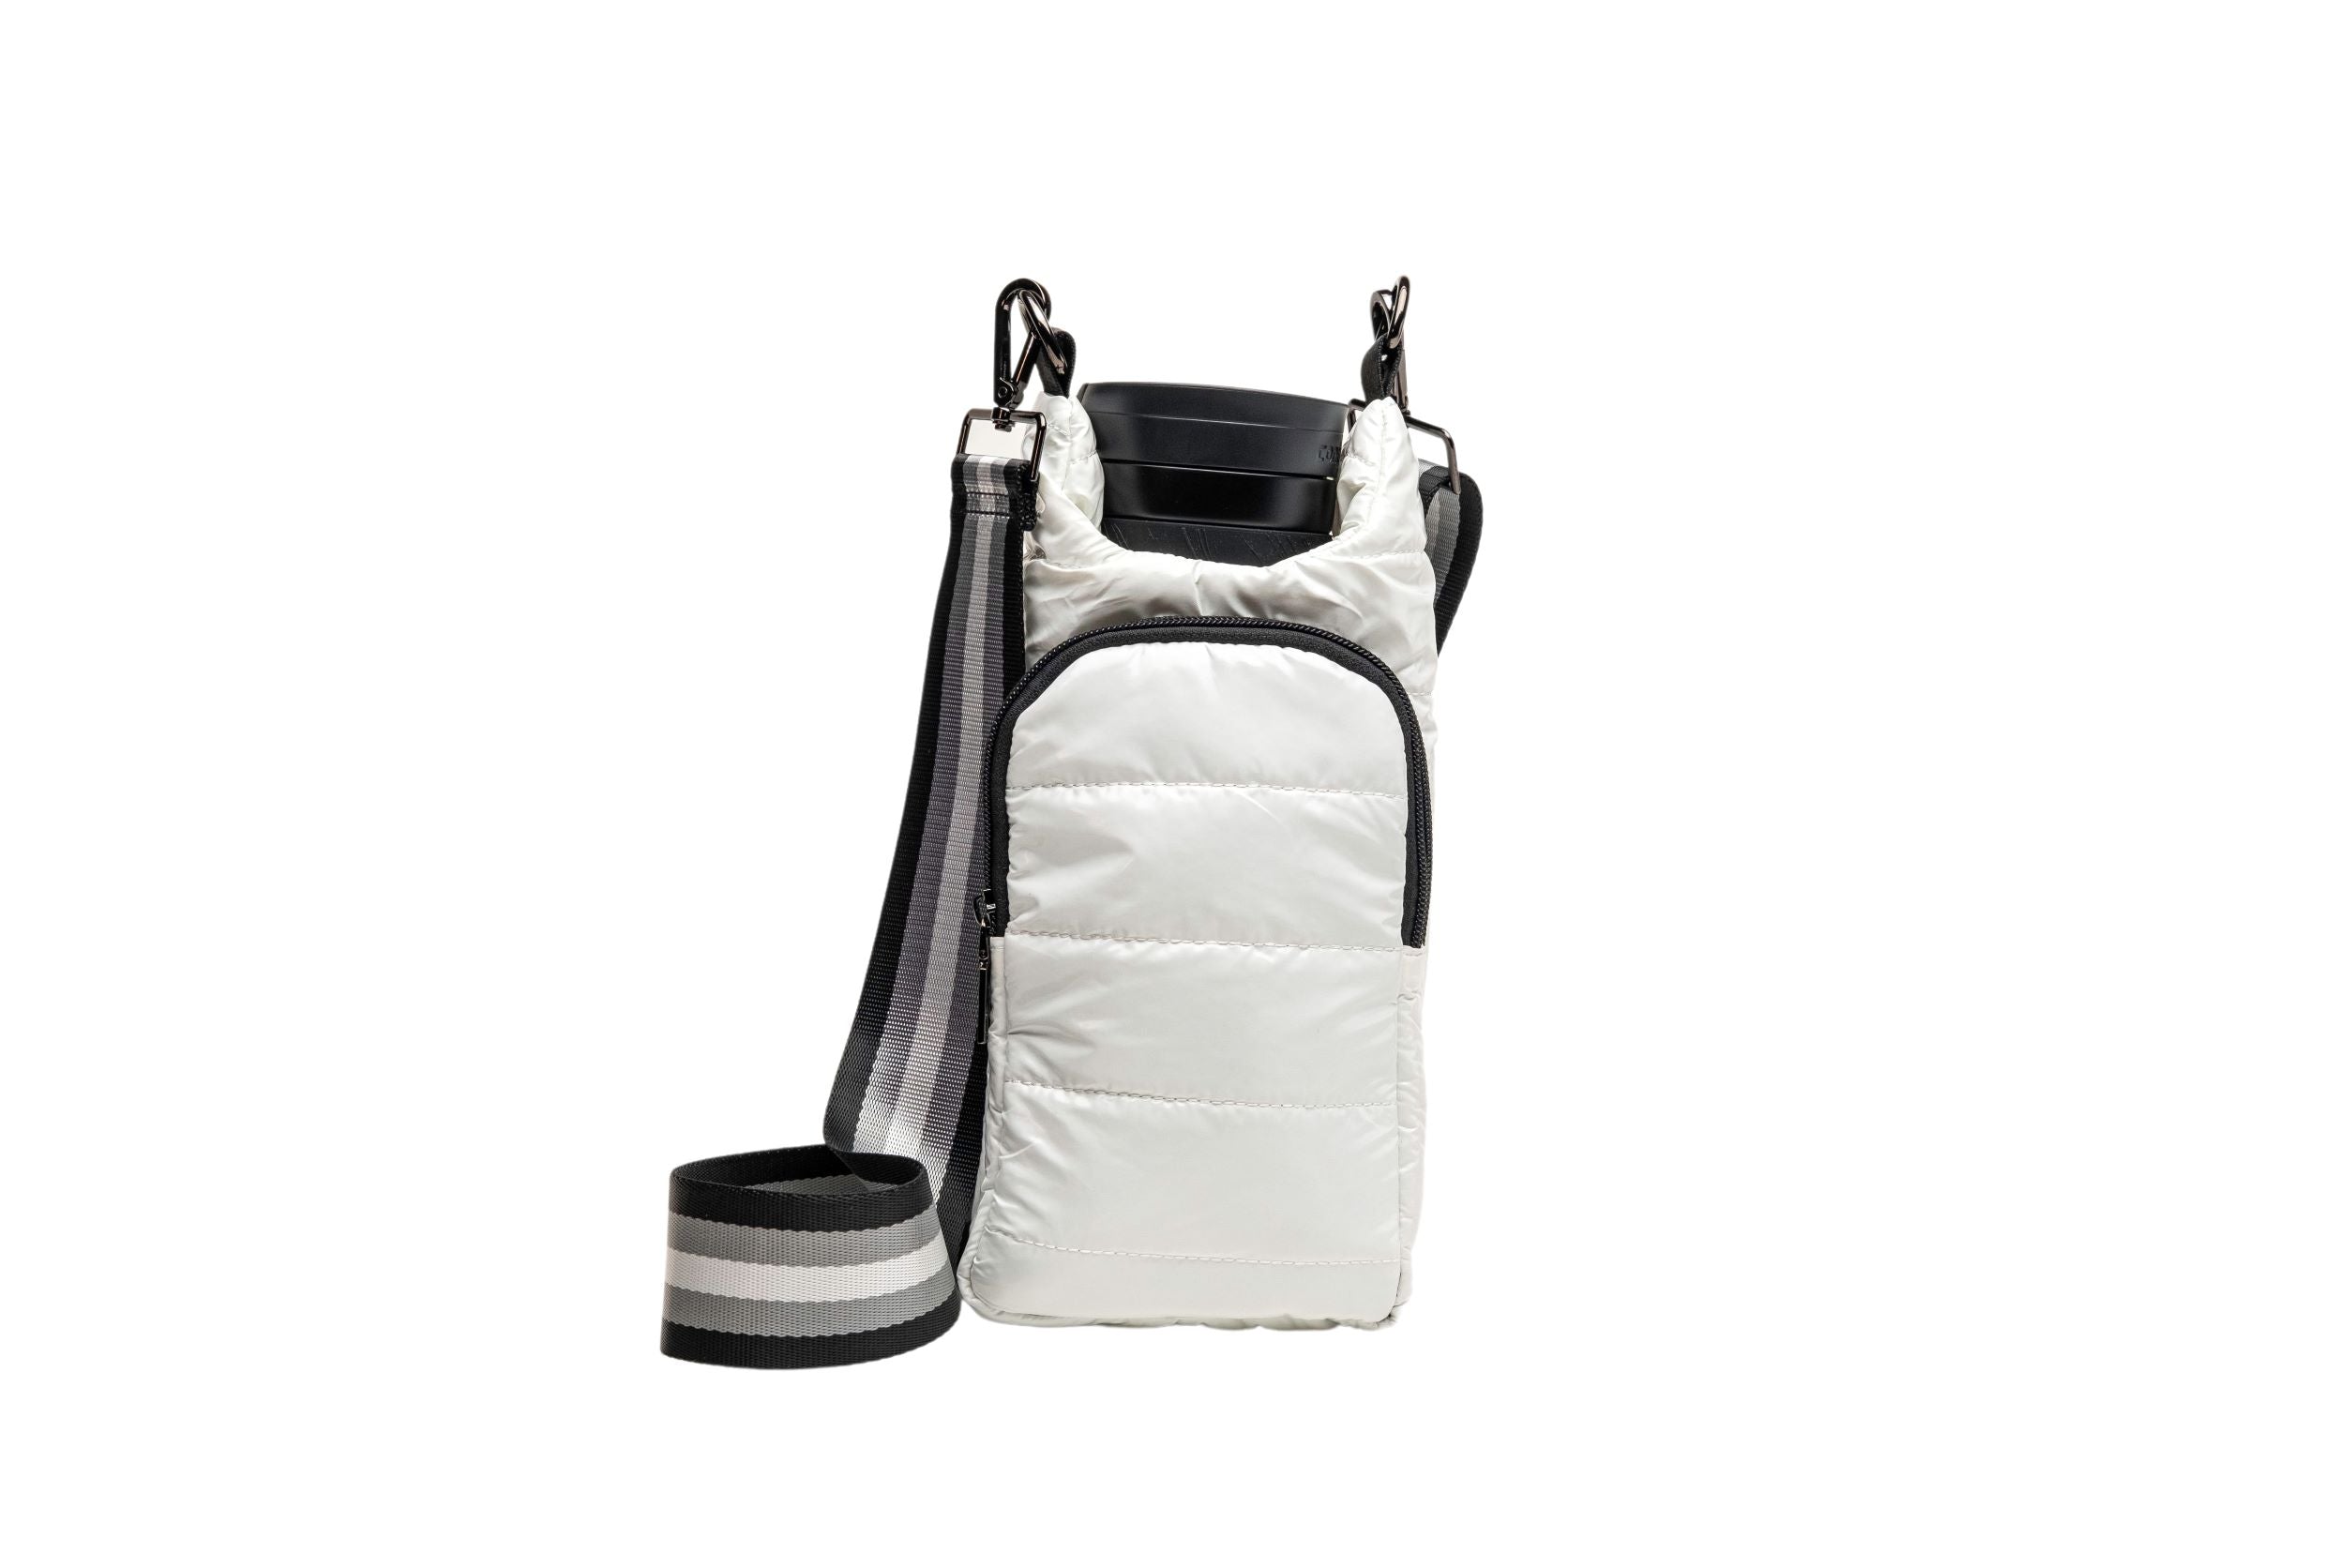 Wholesale Packs (4 or 10) - White Glossy HydroBag™ with Black/Silver/White Strap